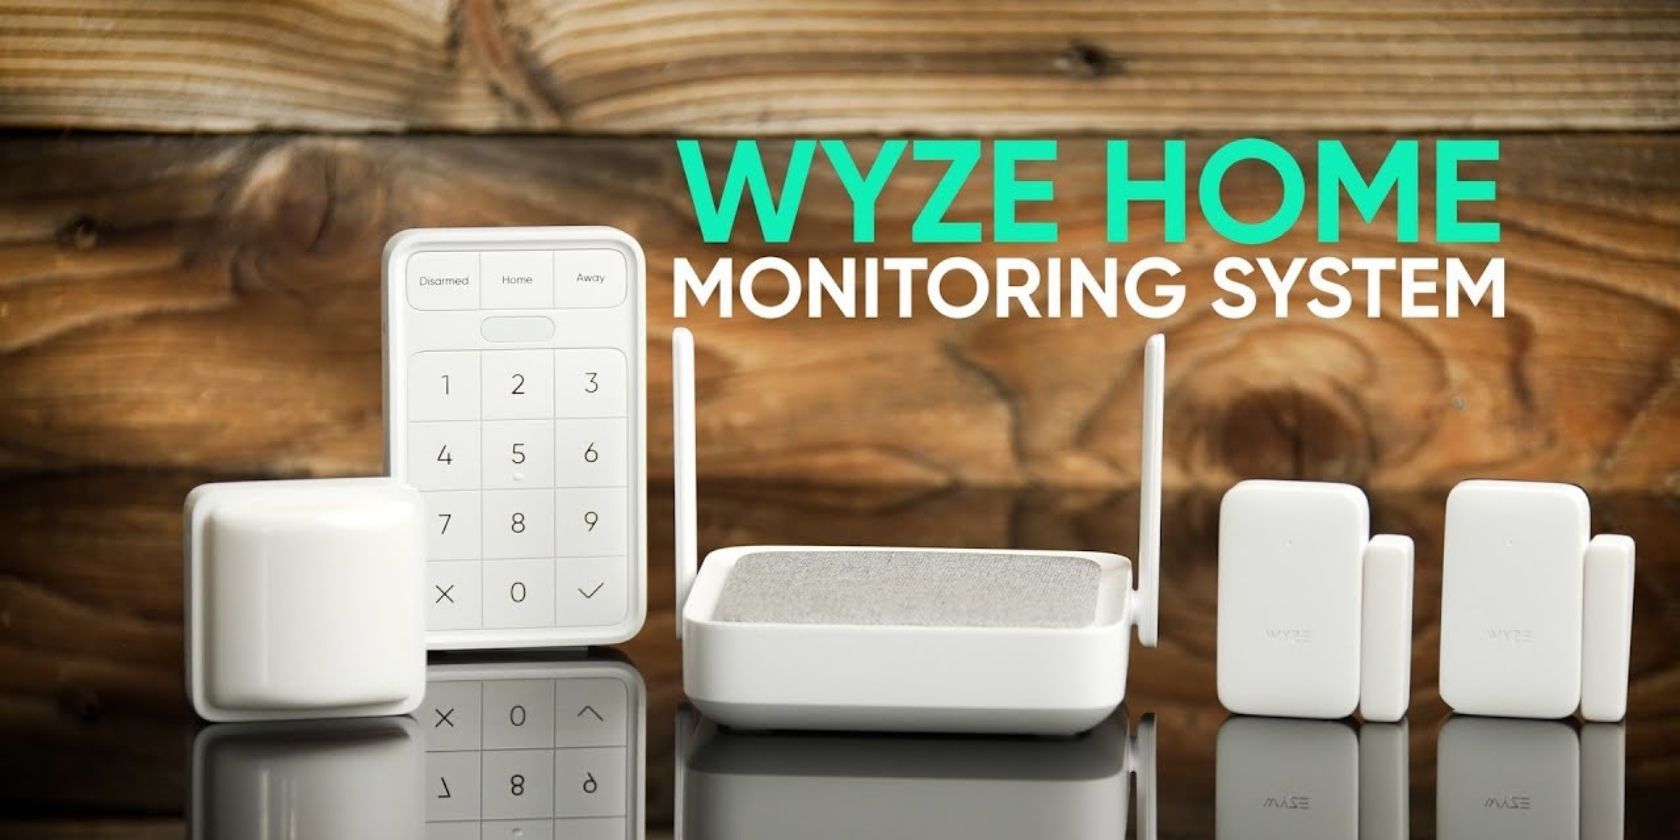 Wyze-home-monitoring-service.jpg